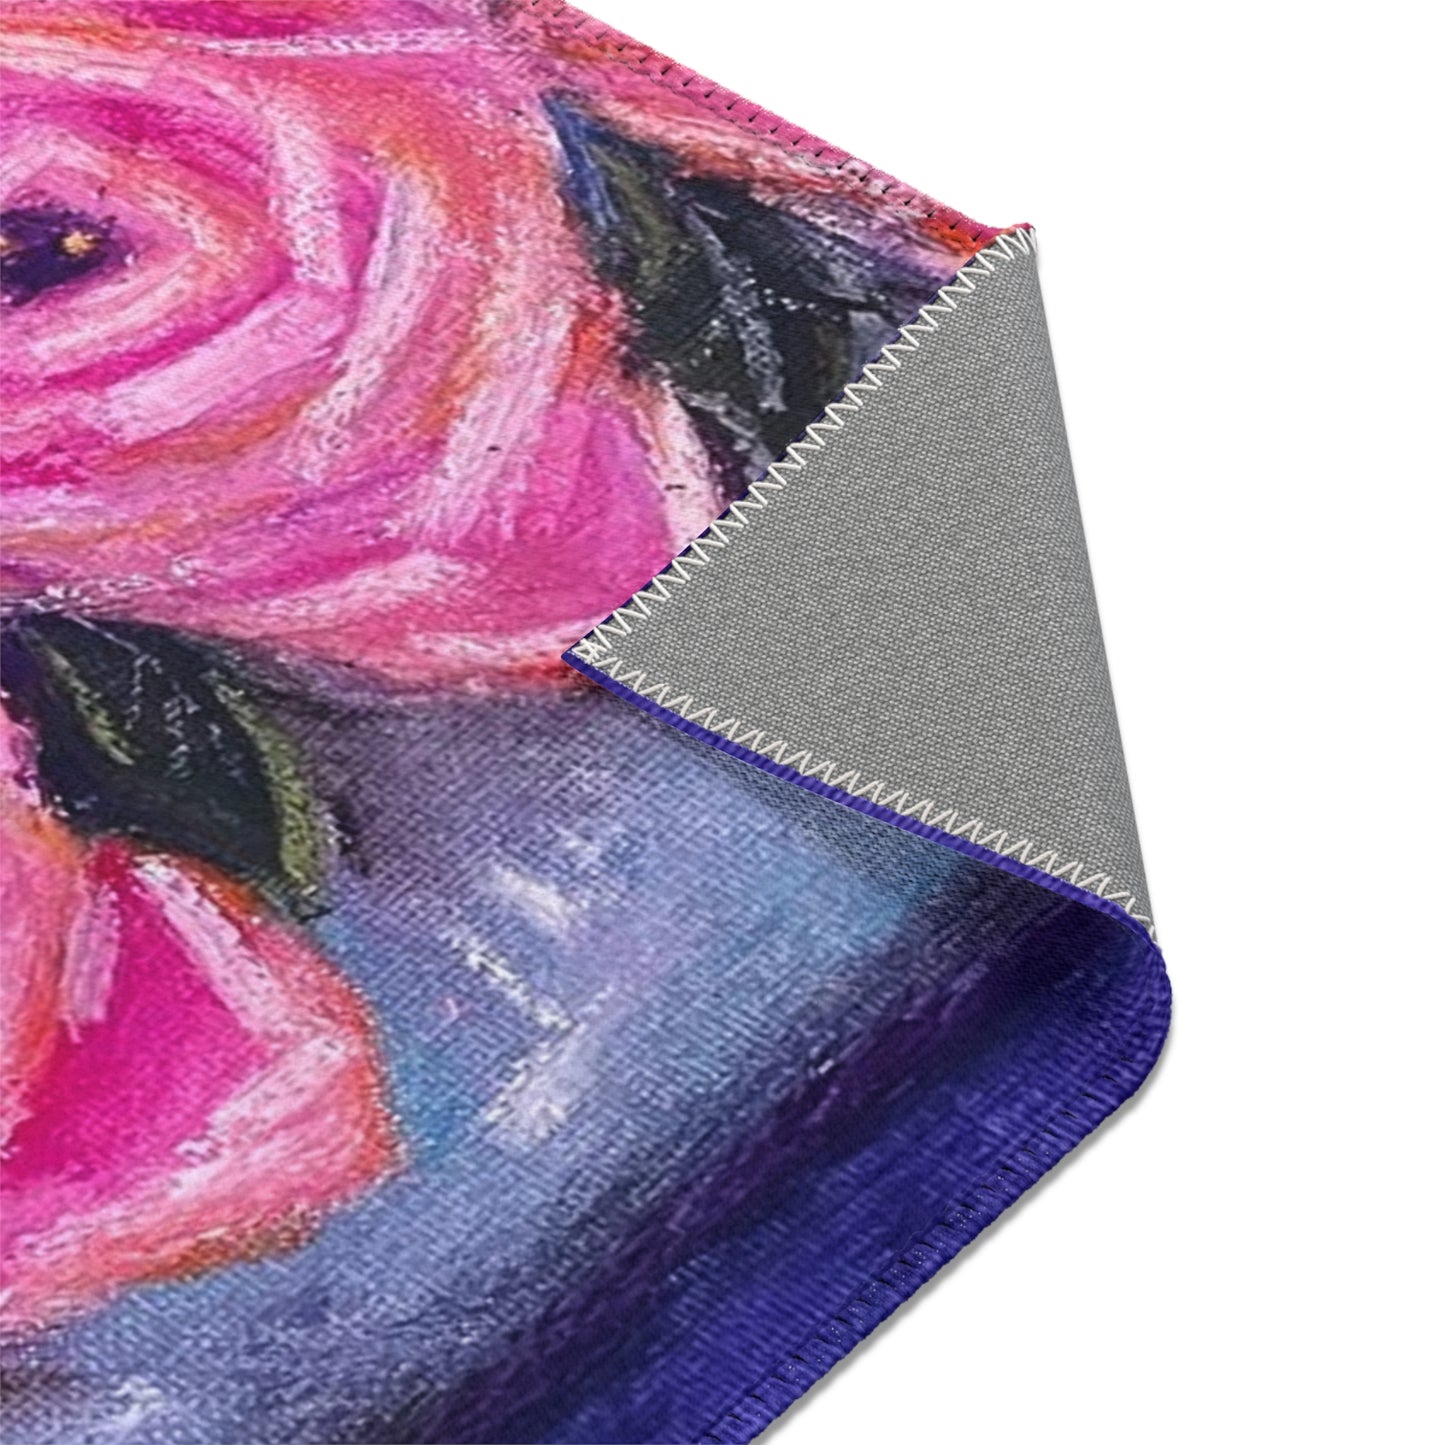 Tin Full of Roses Colorful Area Rug